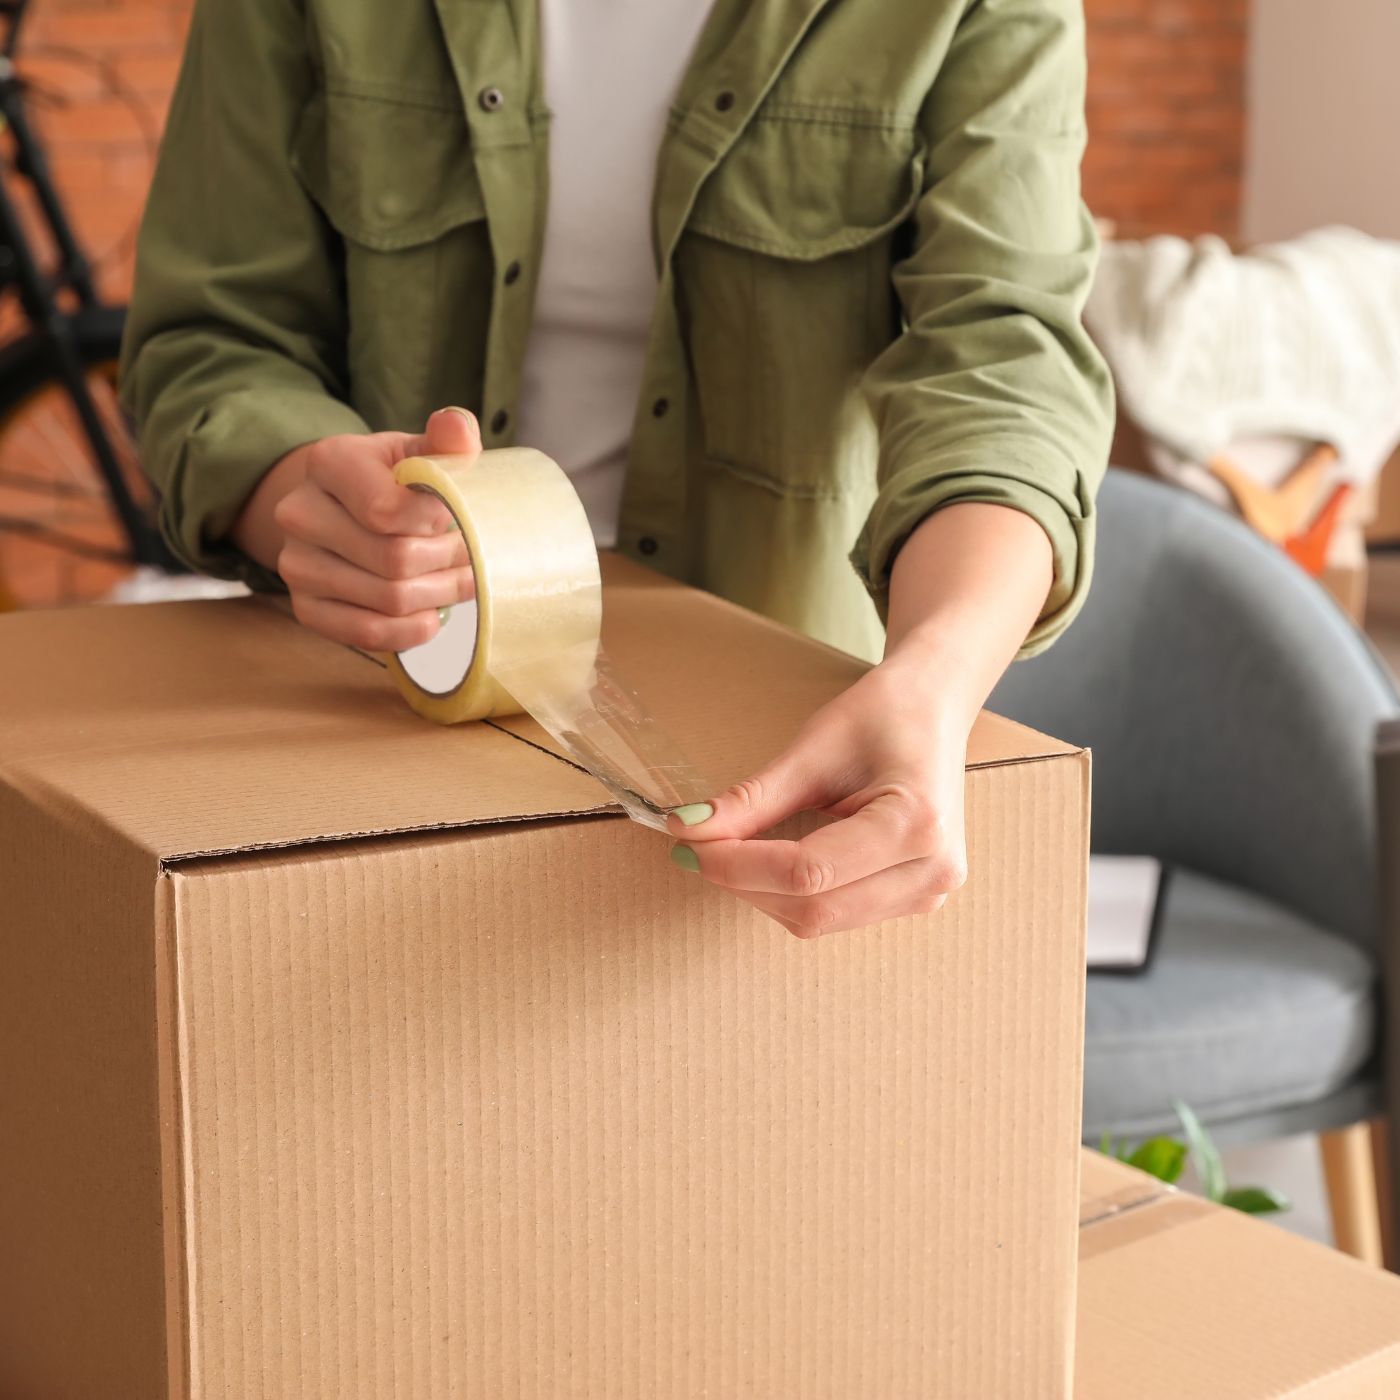 Your Moving Out-of-State Checklist